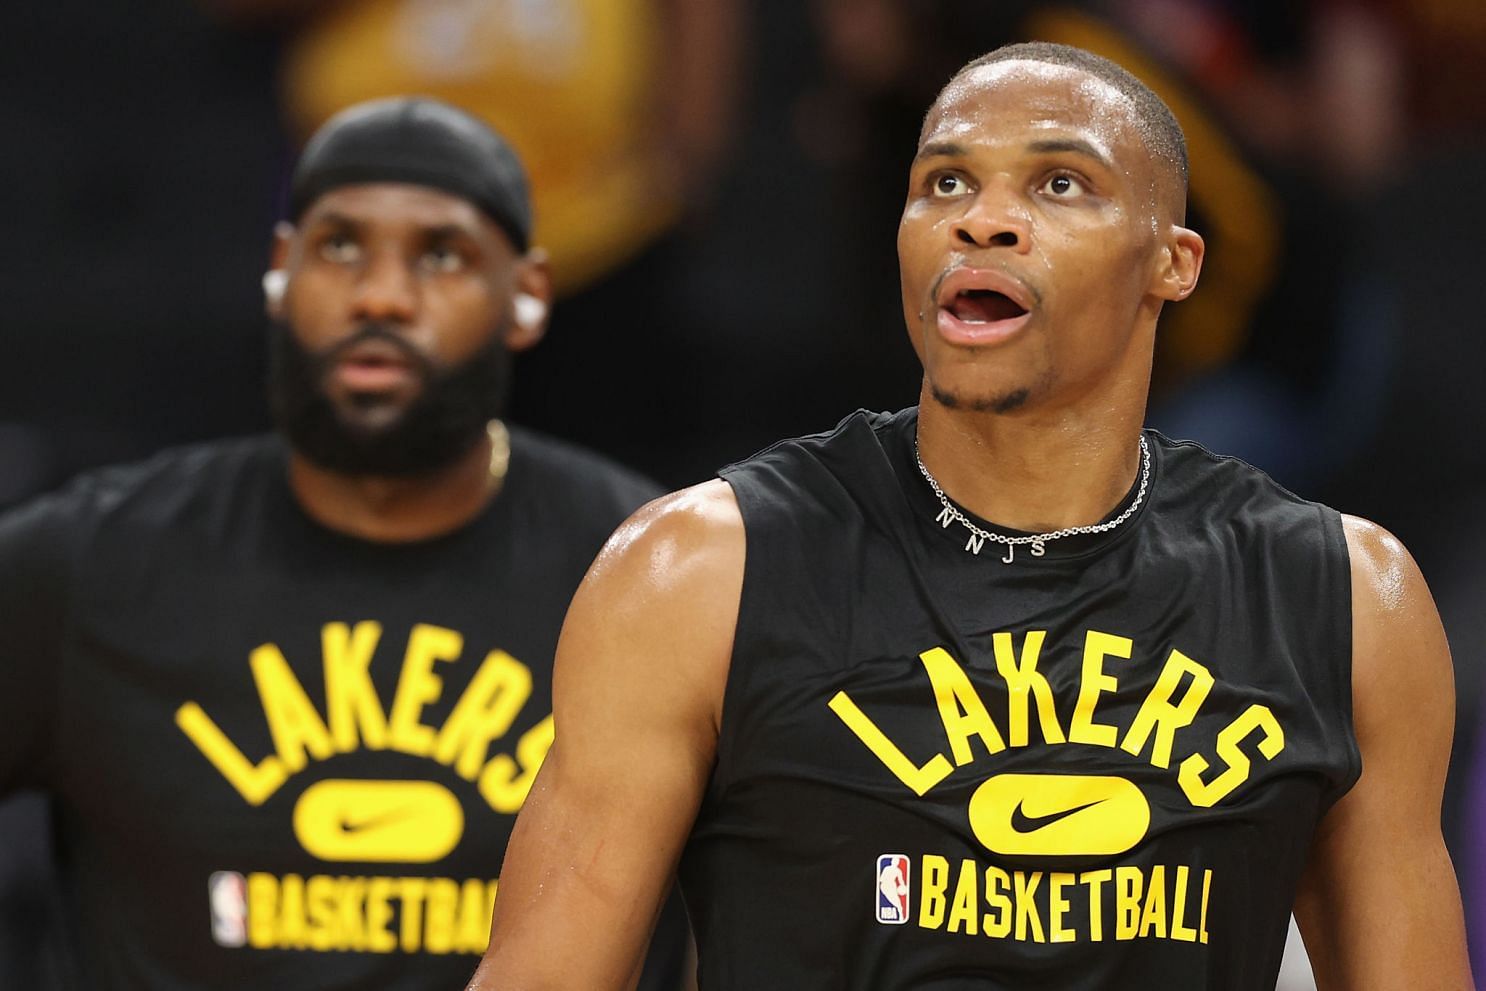 LeBron James and Russell Westbrook will have to limit their turnovers for the Los Angeles Lakers to find their rhythm. [Photo: Los Angeles Times]